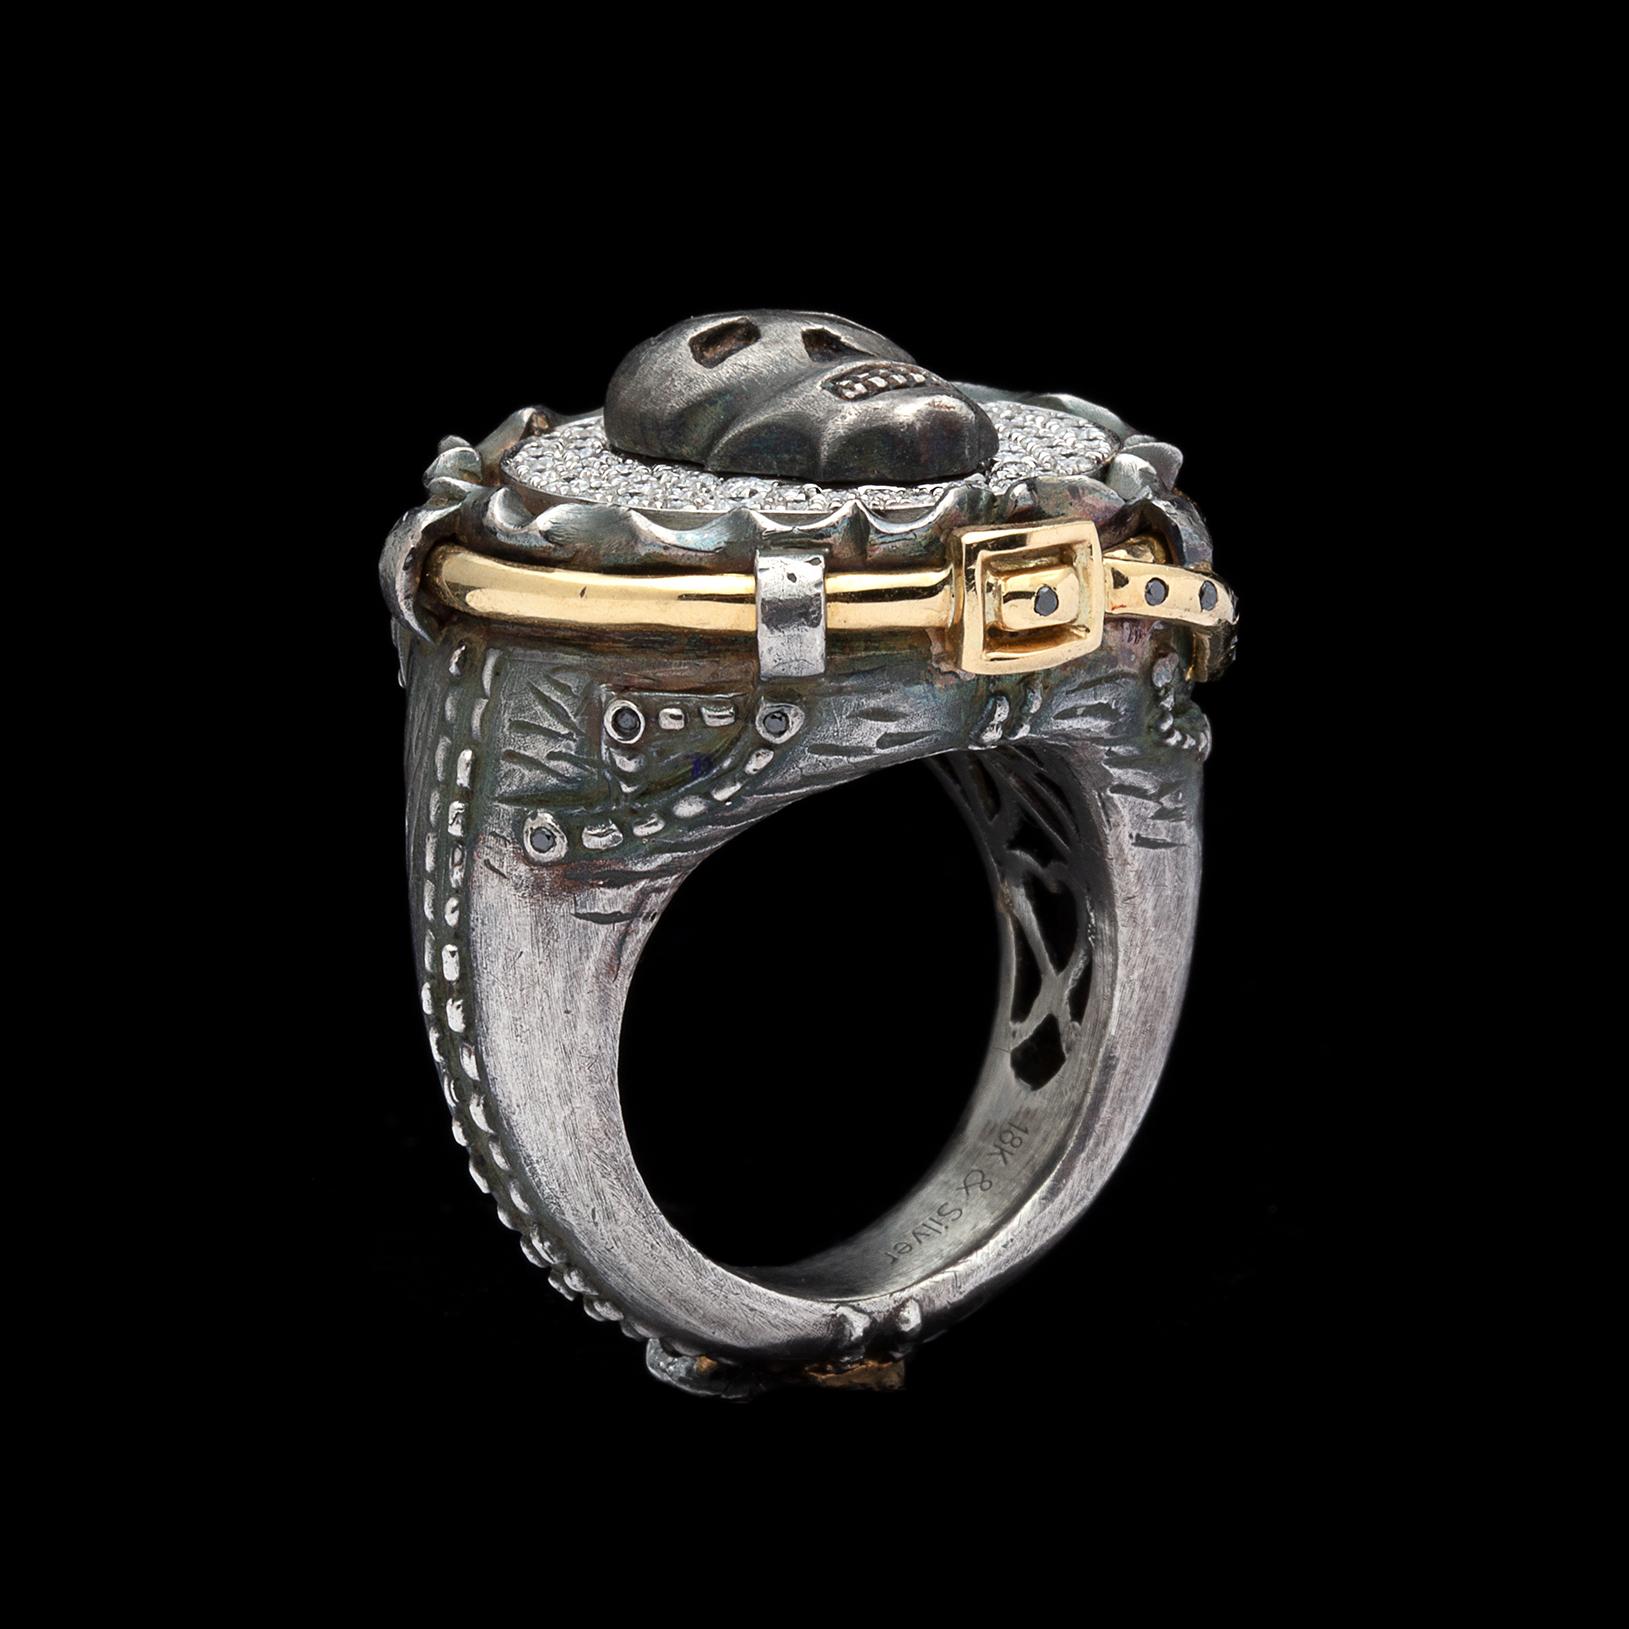 Be outrageous with this fun silver and 18k gold ring! Featuring a skull amidst a bed of round brilliant-cut diamonds, set atop a pair of blackened silver jeans compete with a black diamond-set gold belt. Estimated diamond weight is 0.70 carat. The